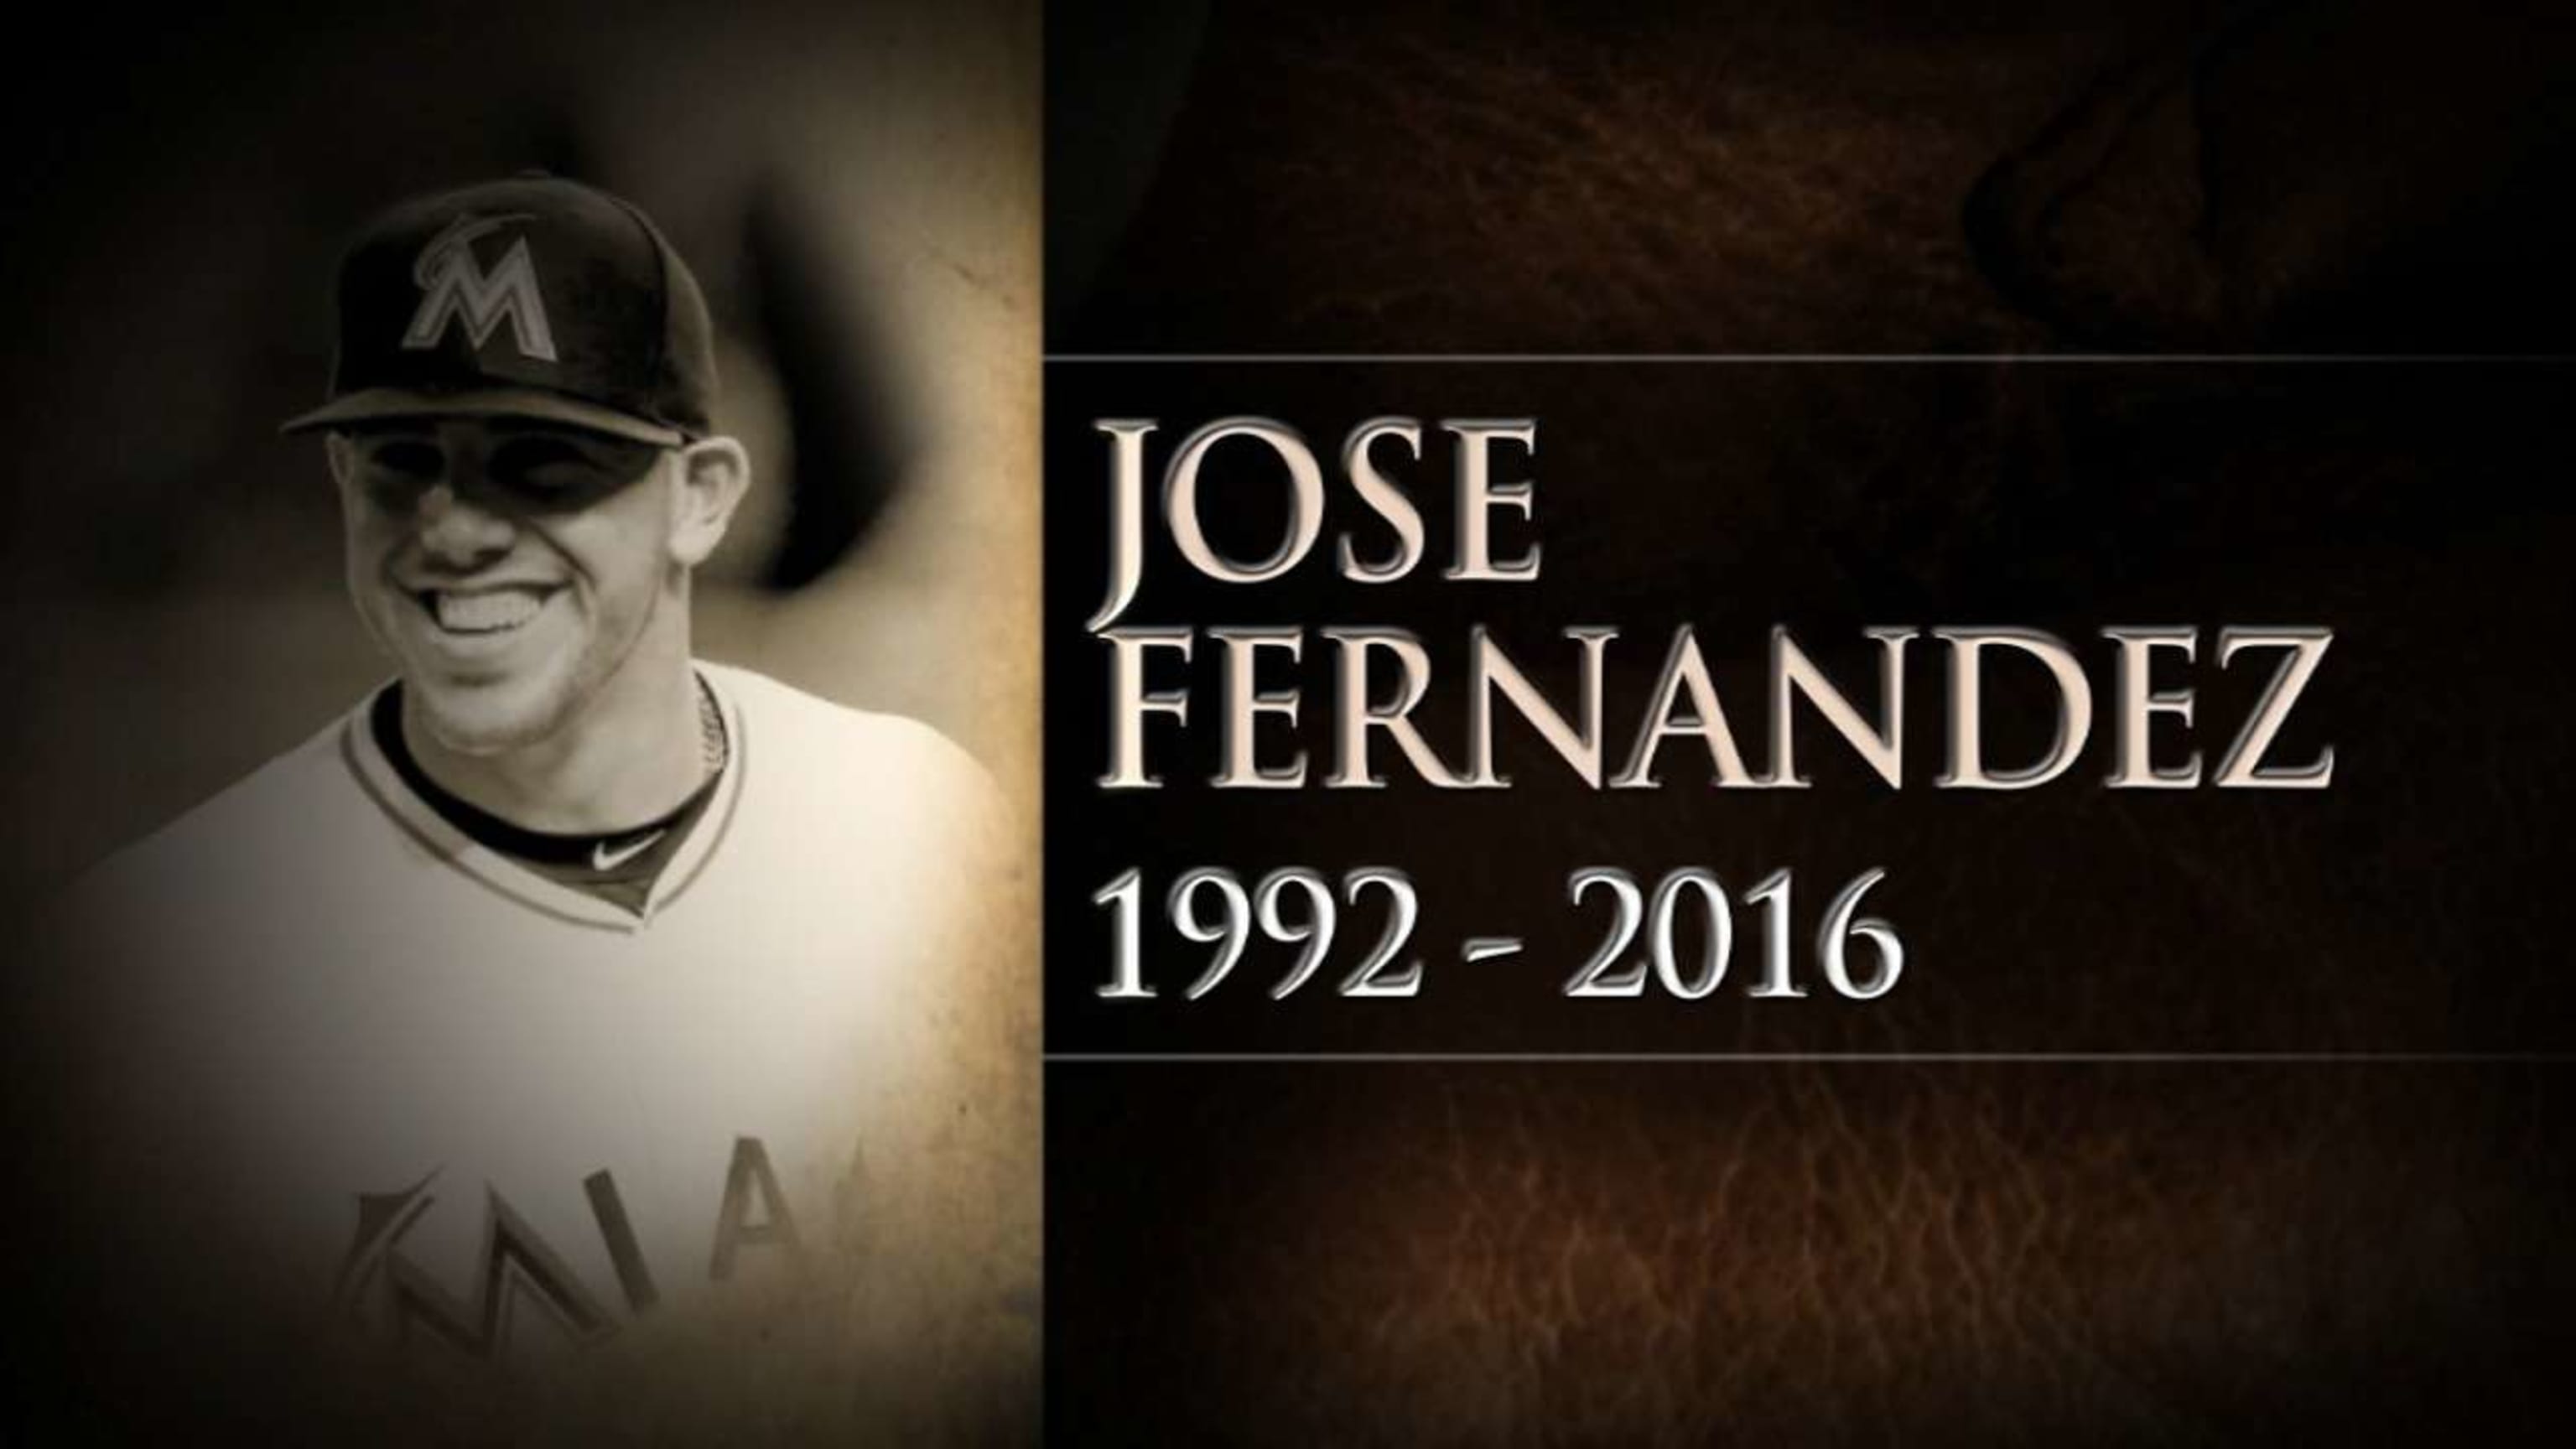 Jose Fernandez's death forever changed the Marlins. And two years later,  it's still impacting several teams - The Athletic